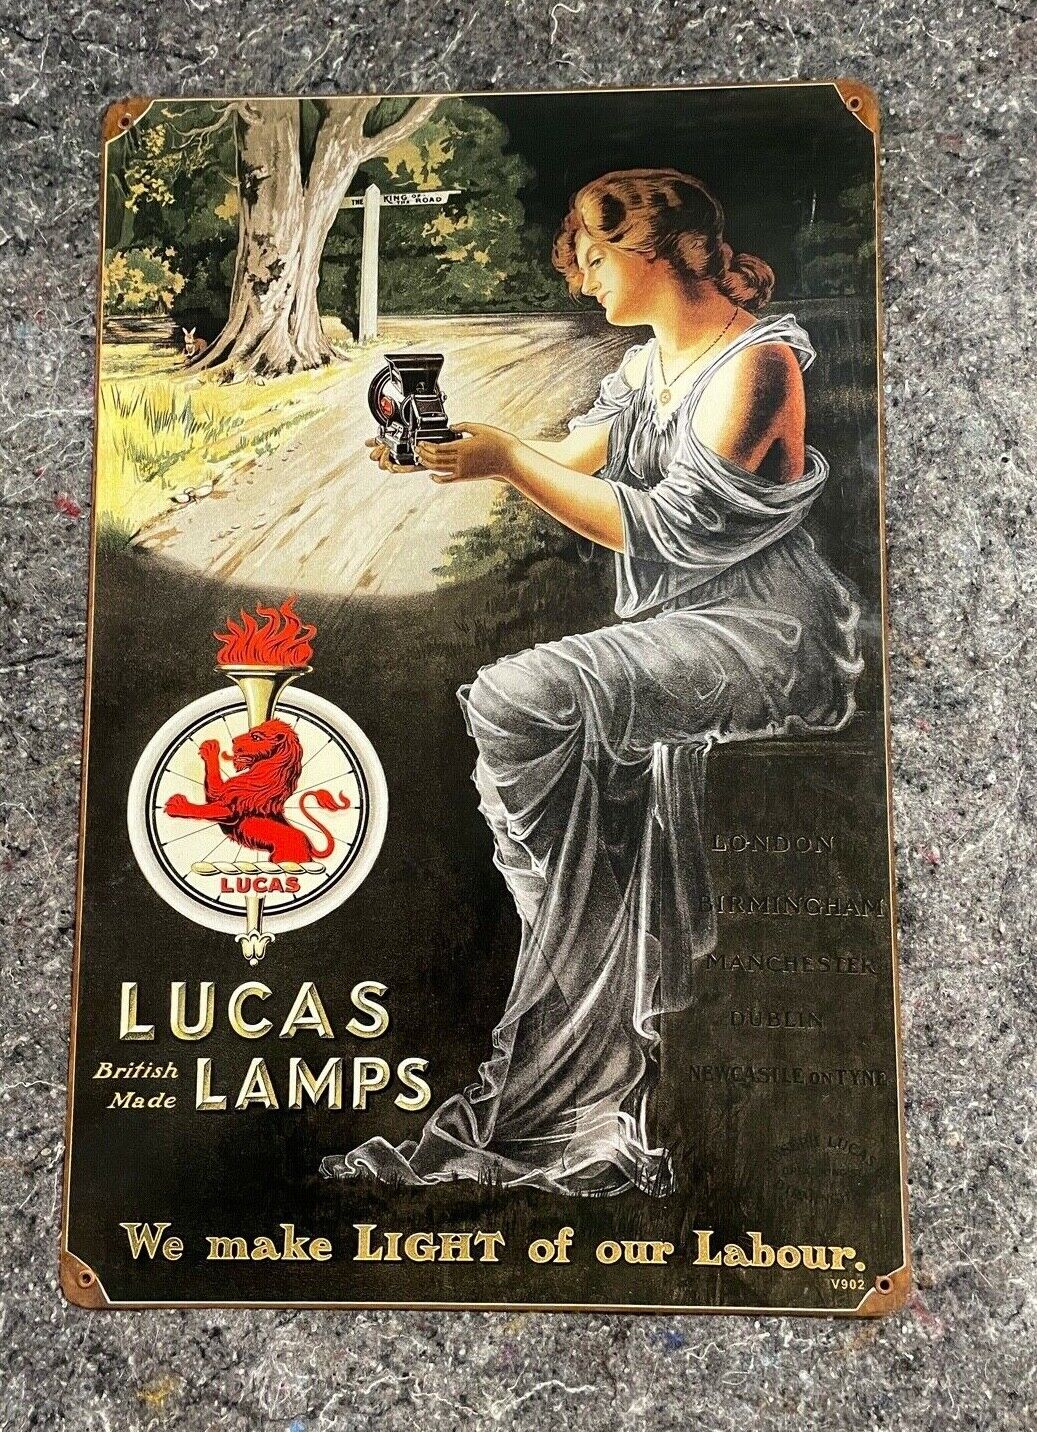 LUCAS LAMPS WW1 WE MAKE LIGHT OF LABOUR VINTAGE STYLE SIGN 17 X 11 